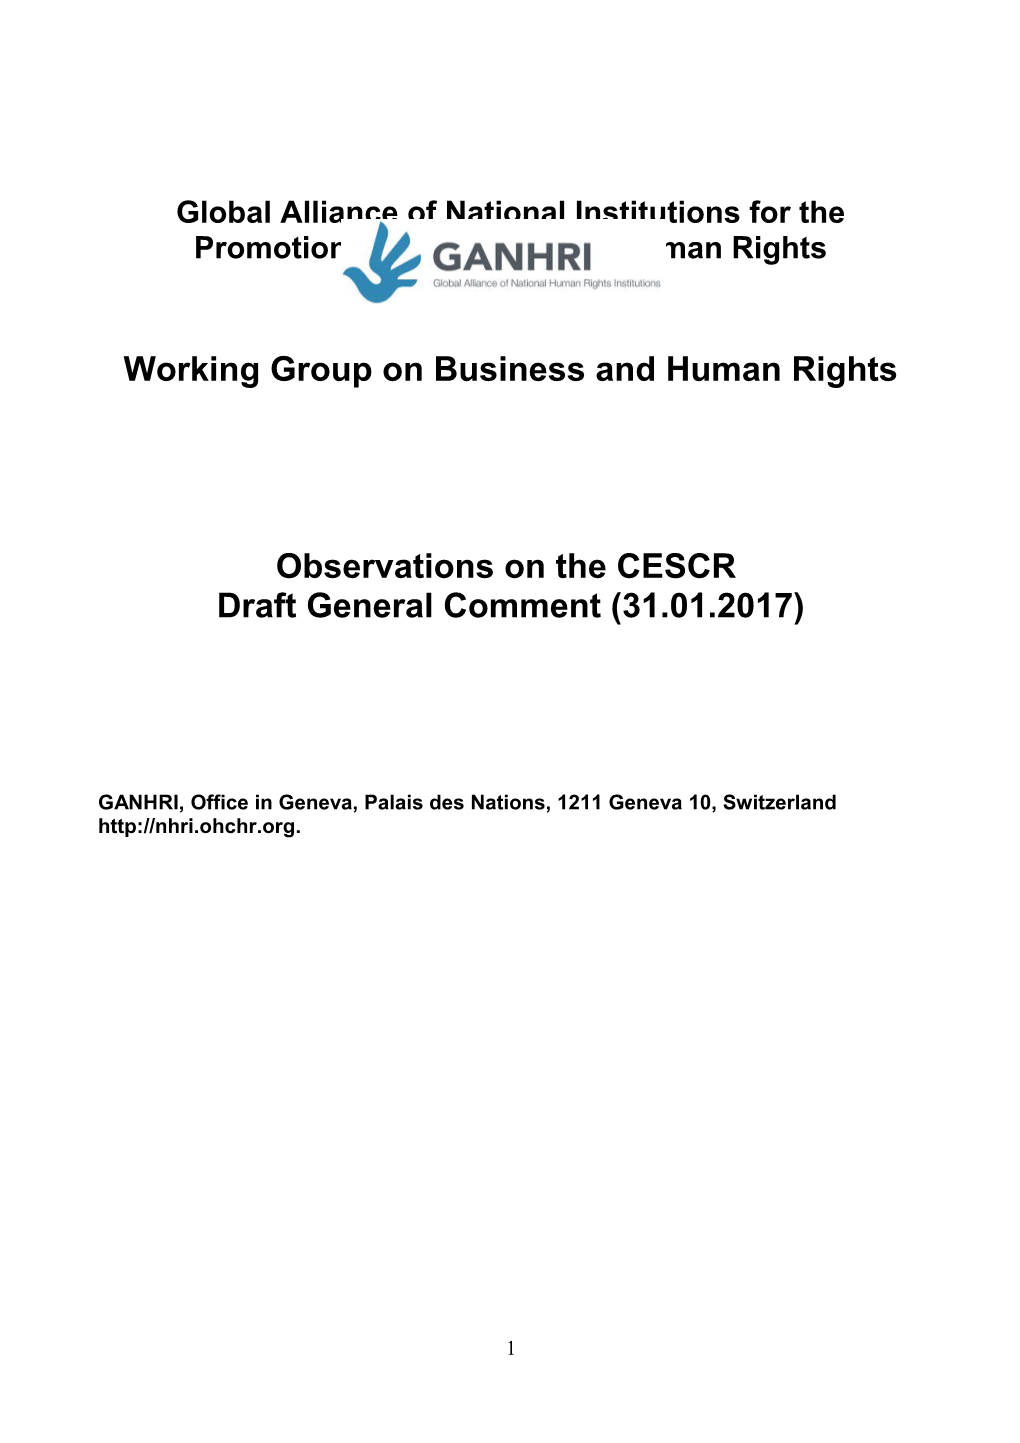 Working Group on Business and Human Rights